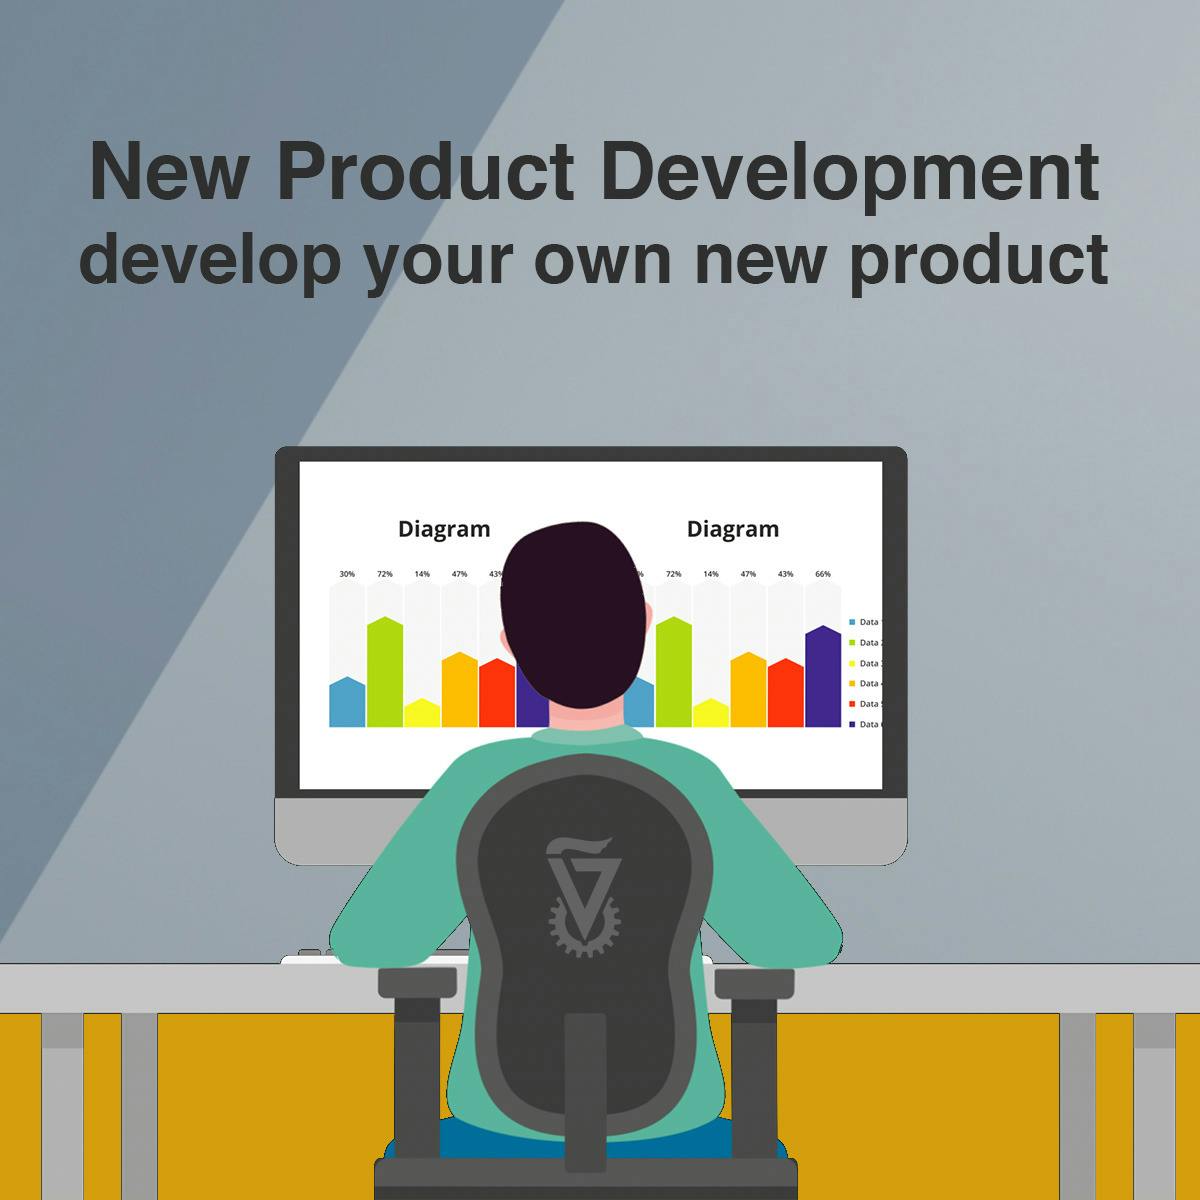 7 Stages of the New Product Development Process